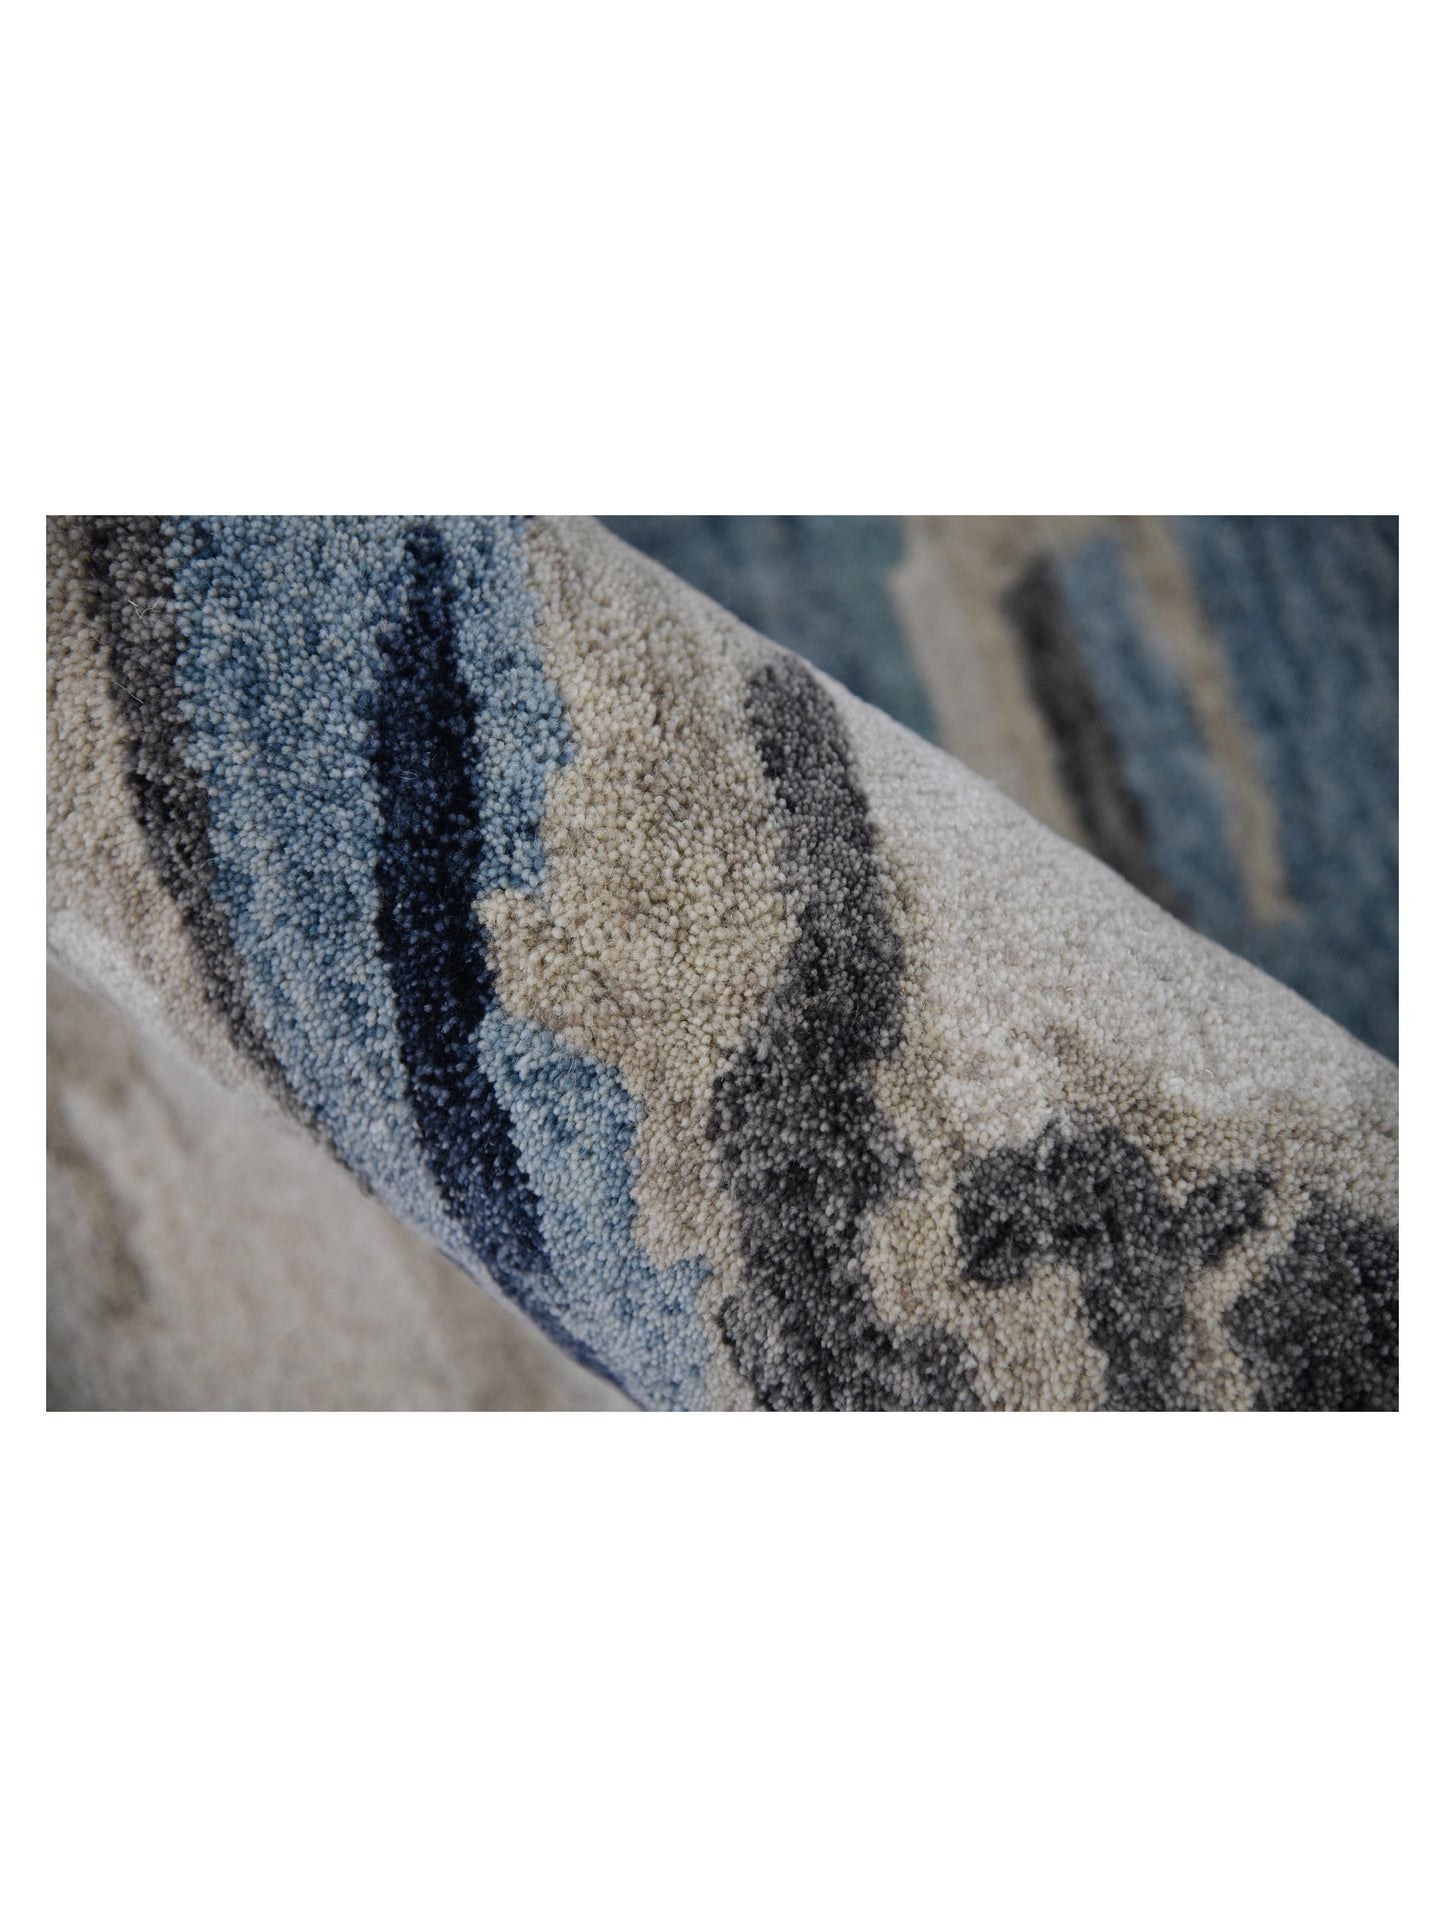 Limited ADELAIDE AD-104 BLUE  Transitional Tufted Rug